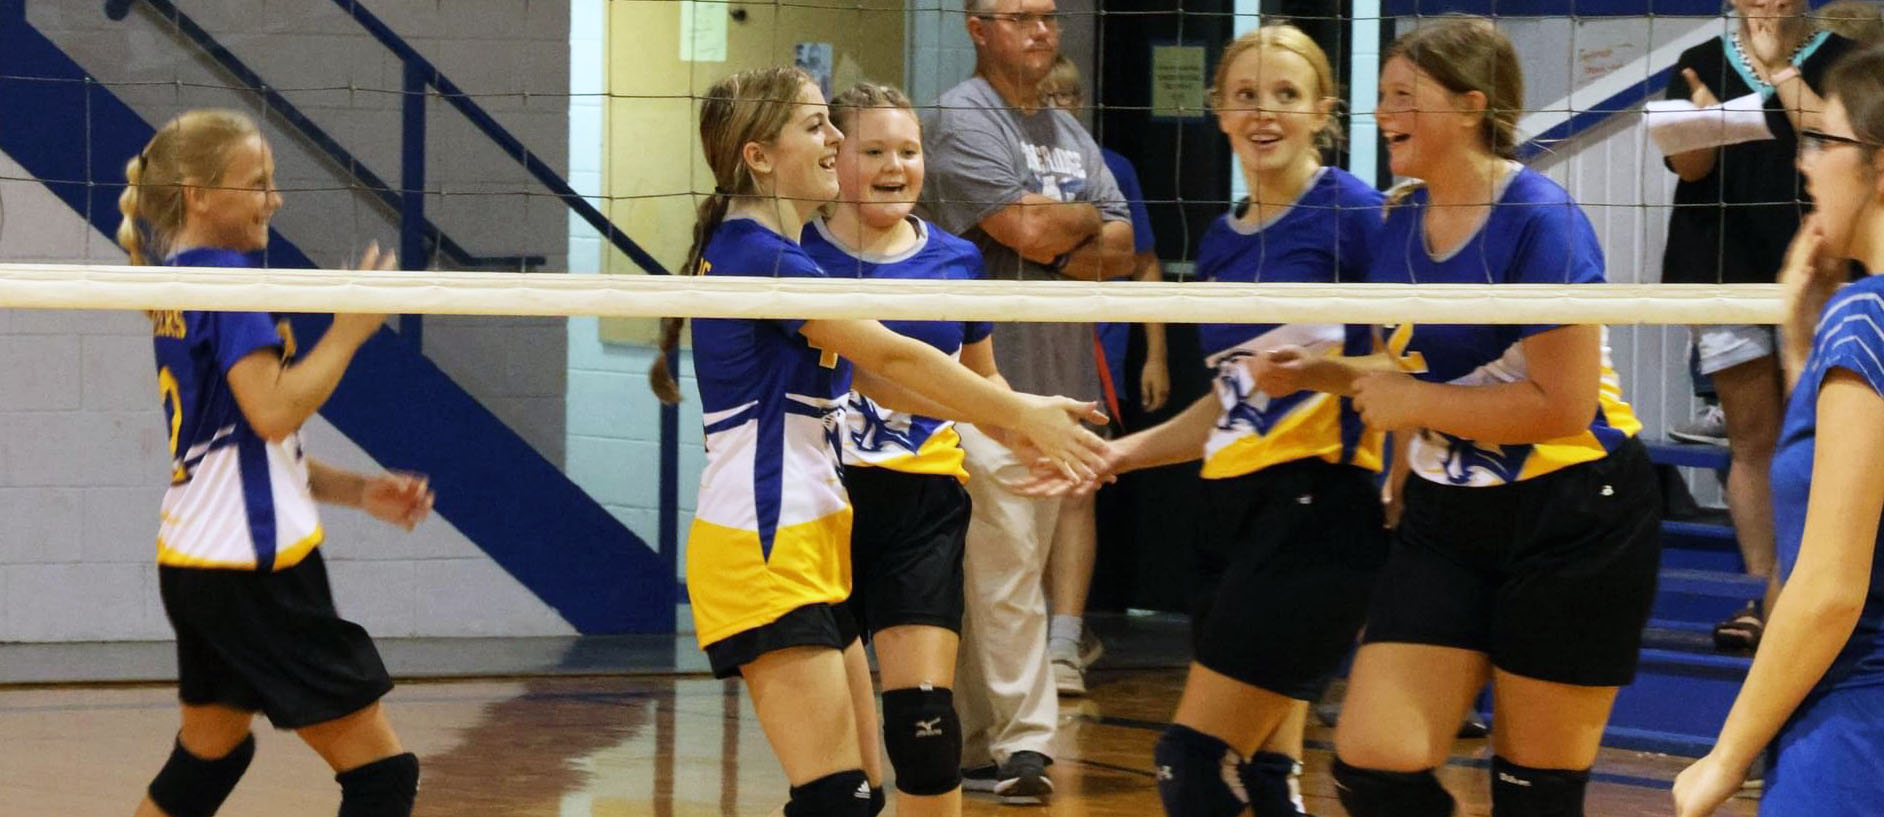 Volleyball Players Laughing After Good Play